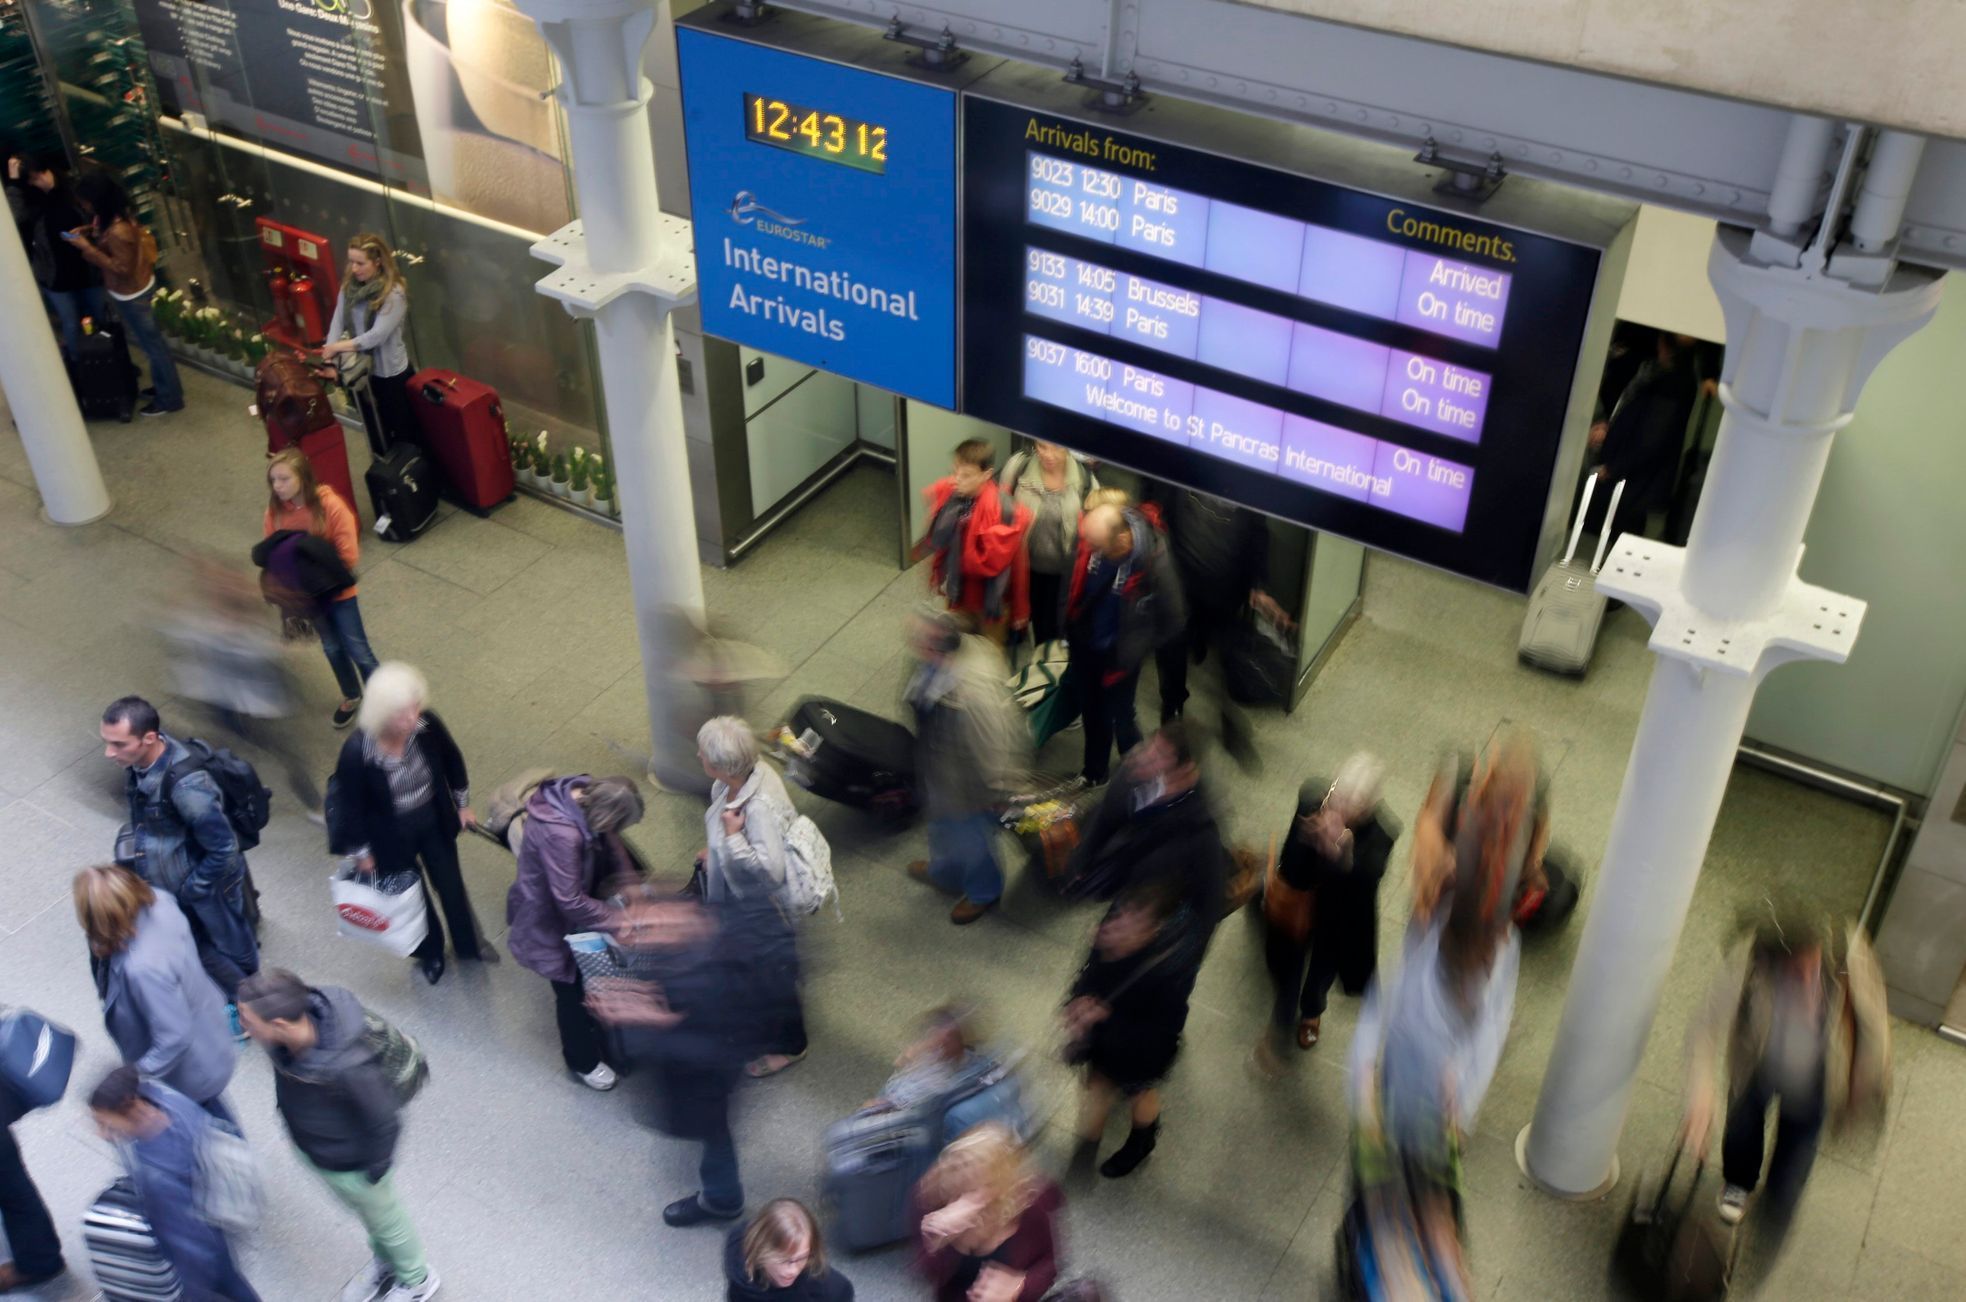 Passengers arrive from a Eurostar train at St Pancras Station in London